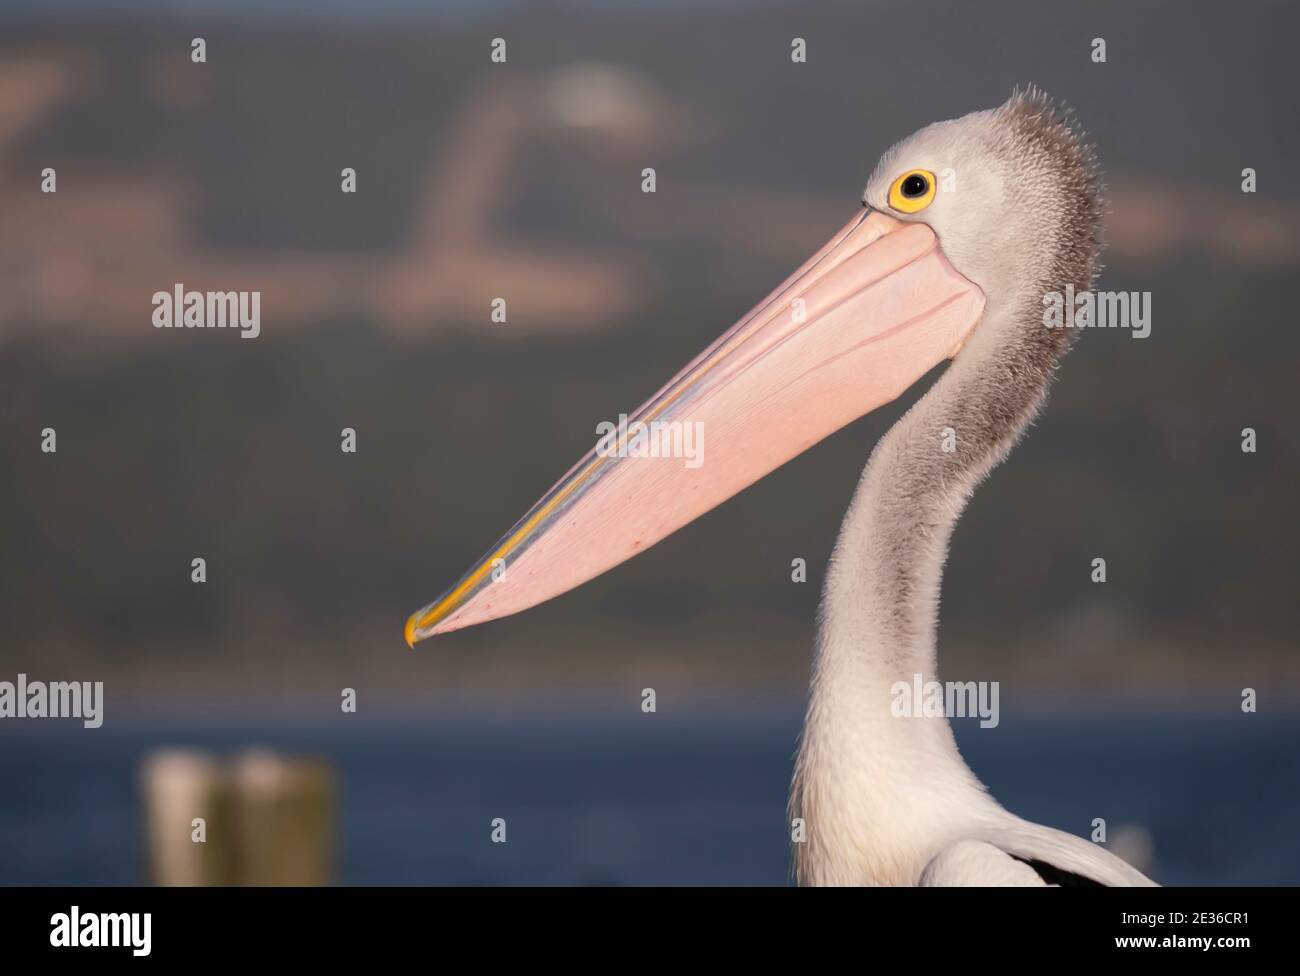 An Australian pelican, Pelecanus conspicillatus, sitting on a jetty with other sea birds and seagulls at Oyster Harbour, Albany Western Australia.  Fa Stock Photo